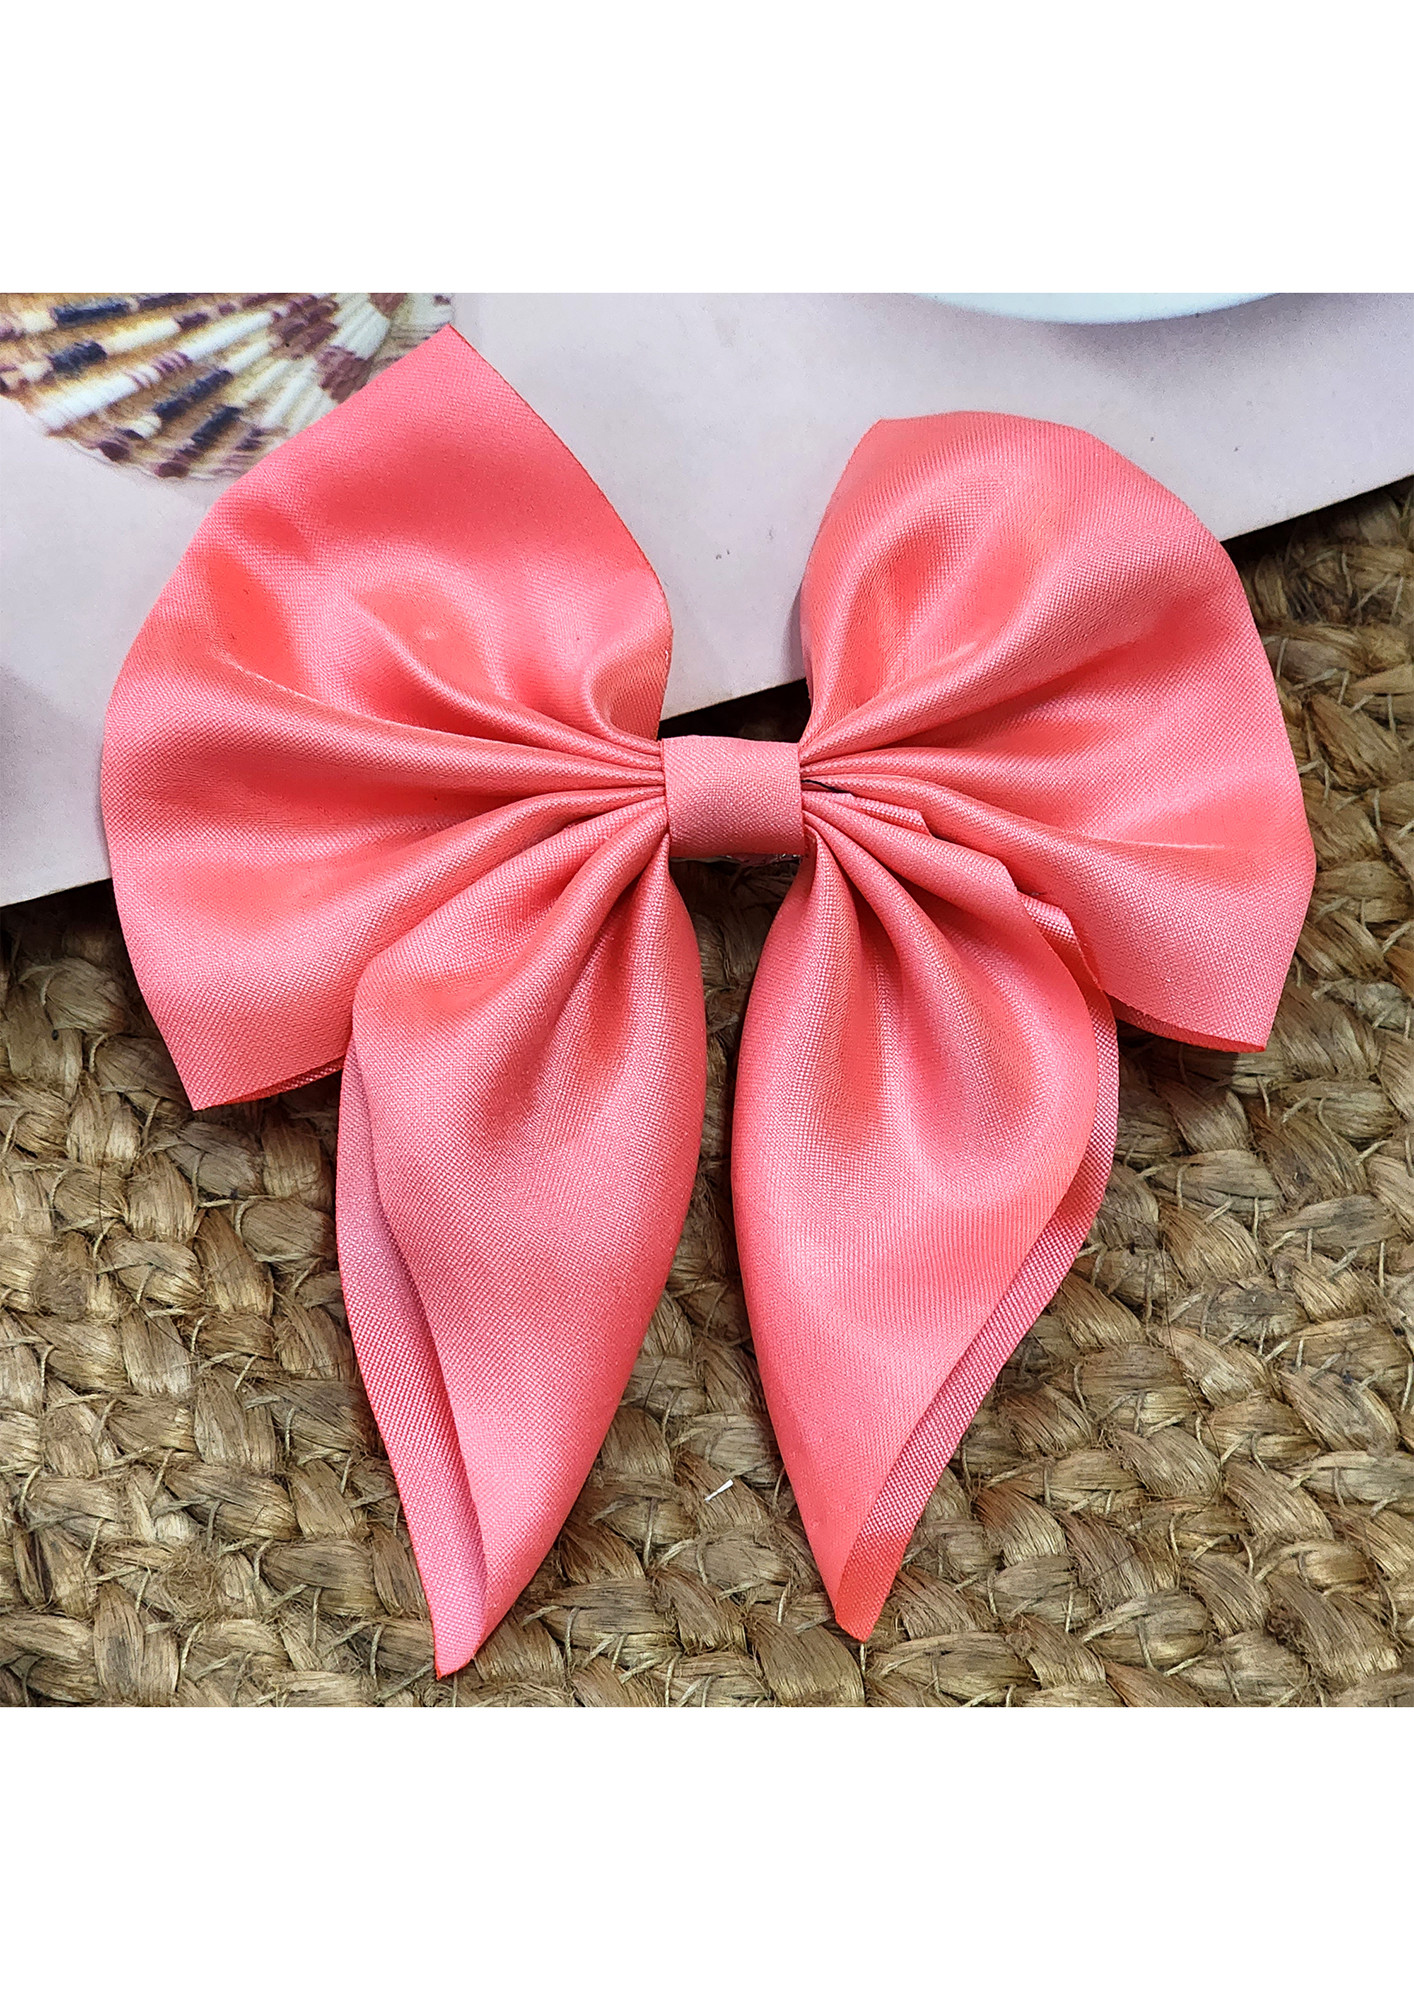 Gimme Ribbon Bow Hair Clip, Multi-Colored, 6 ct, Infant Unisex, Size: Small